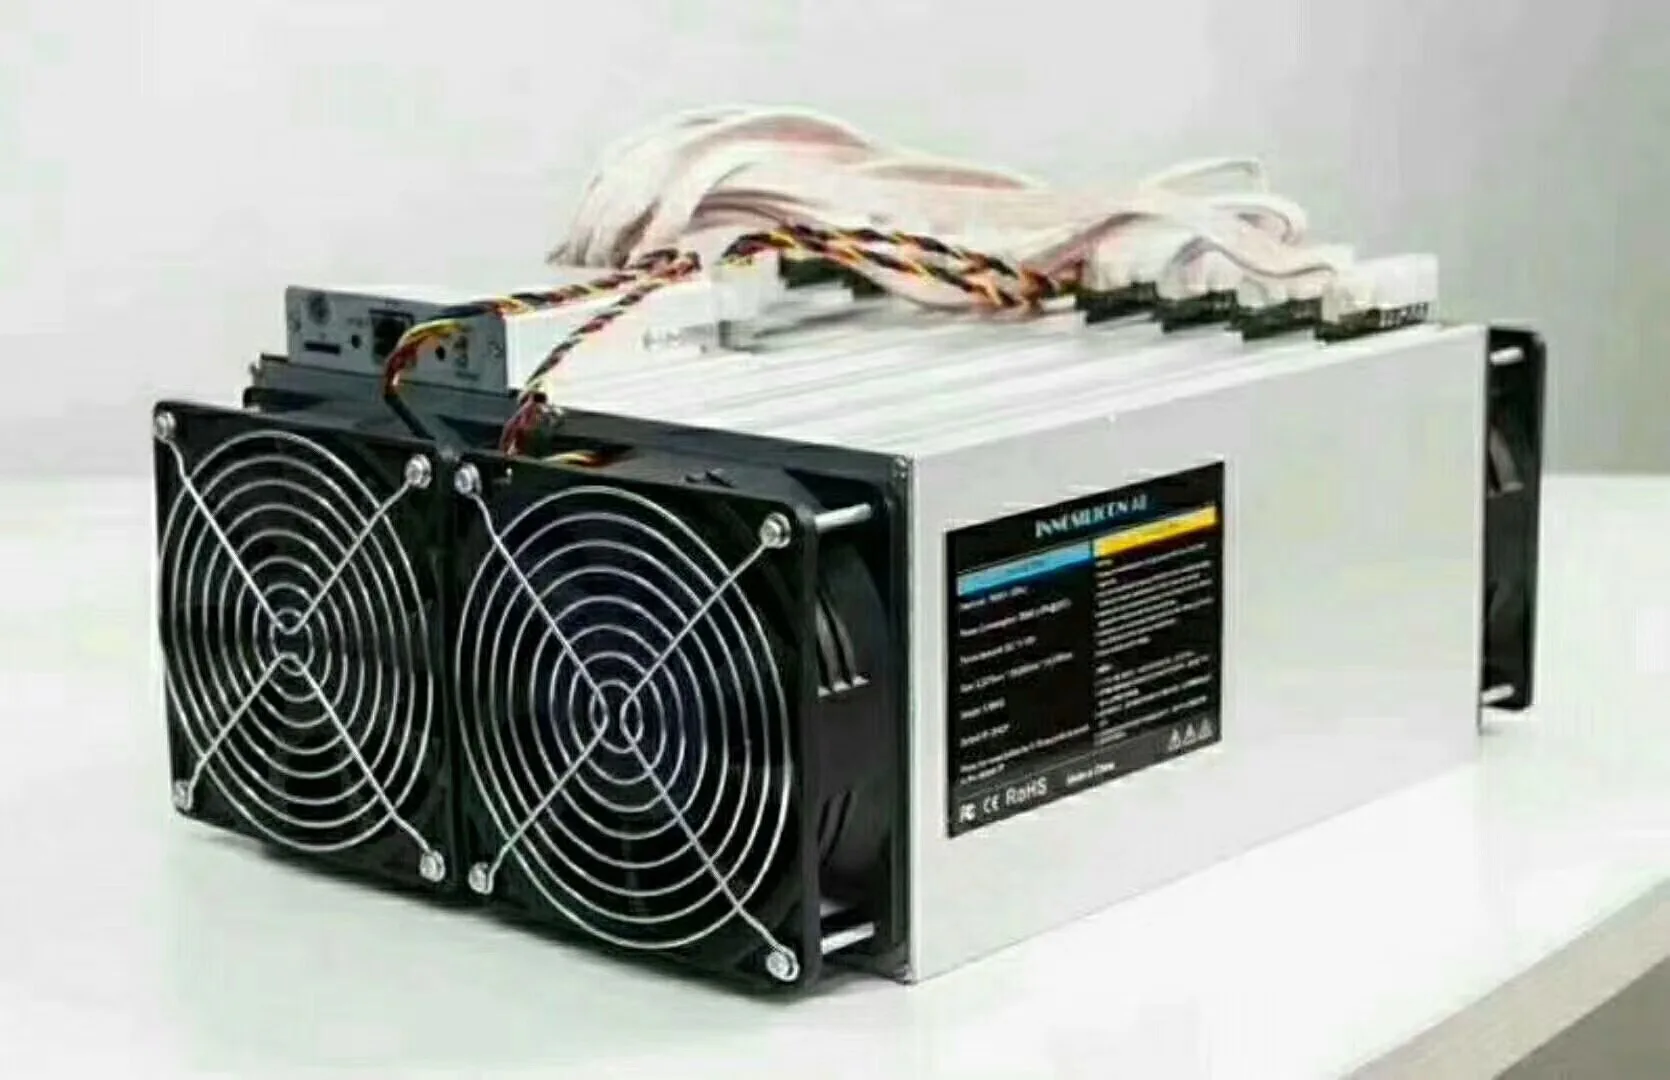 New Arrival In Stock A8 Good Profit! Monero Miner 240kh/s ...